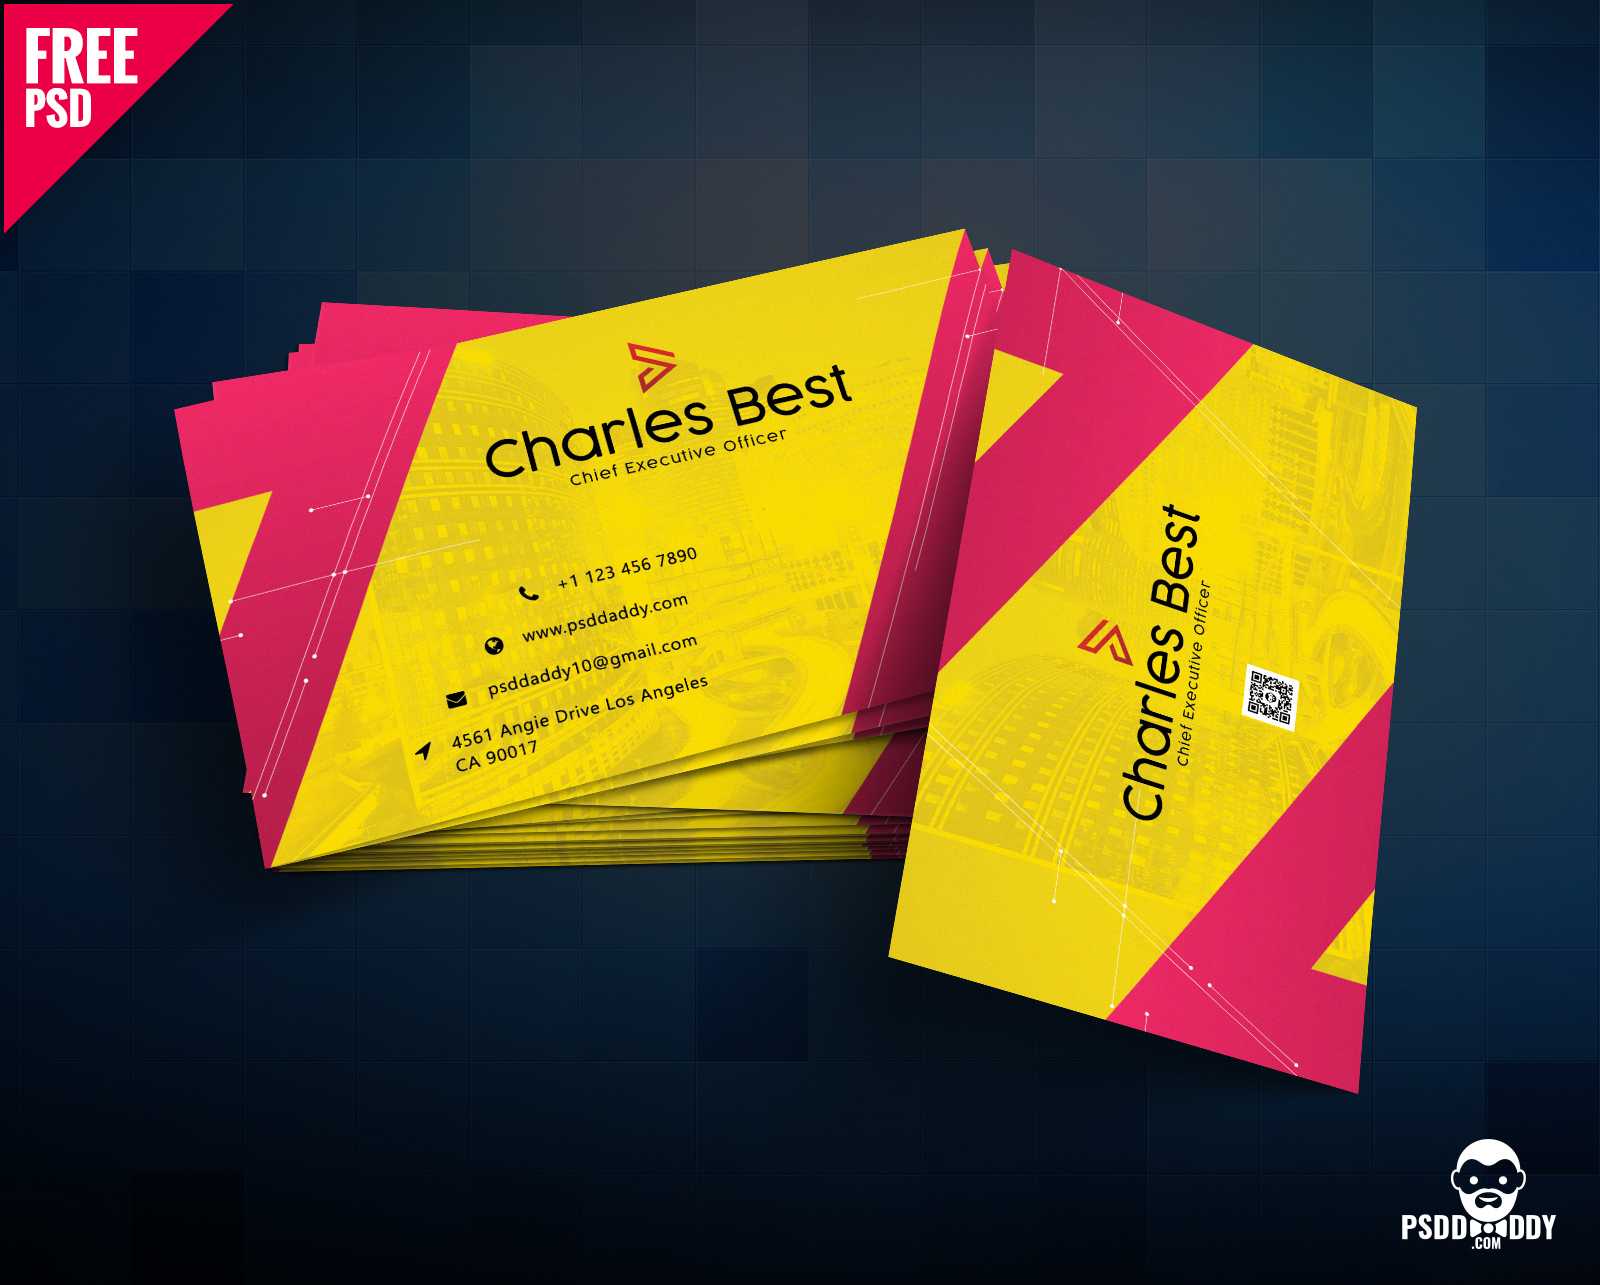 Download] Creative Business Card Free Psd | Psddaddy With Creative Business Card Templates Psd